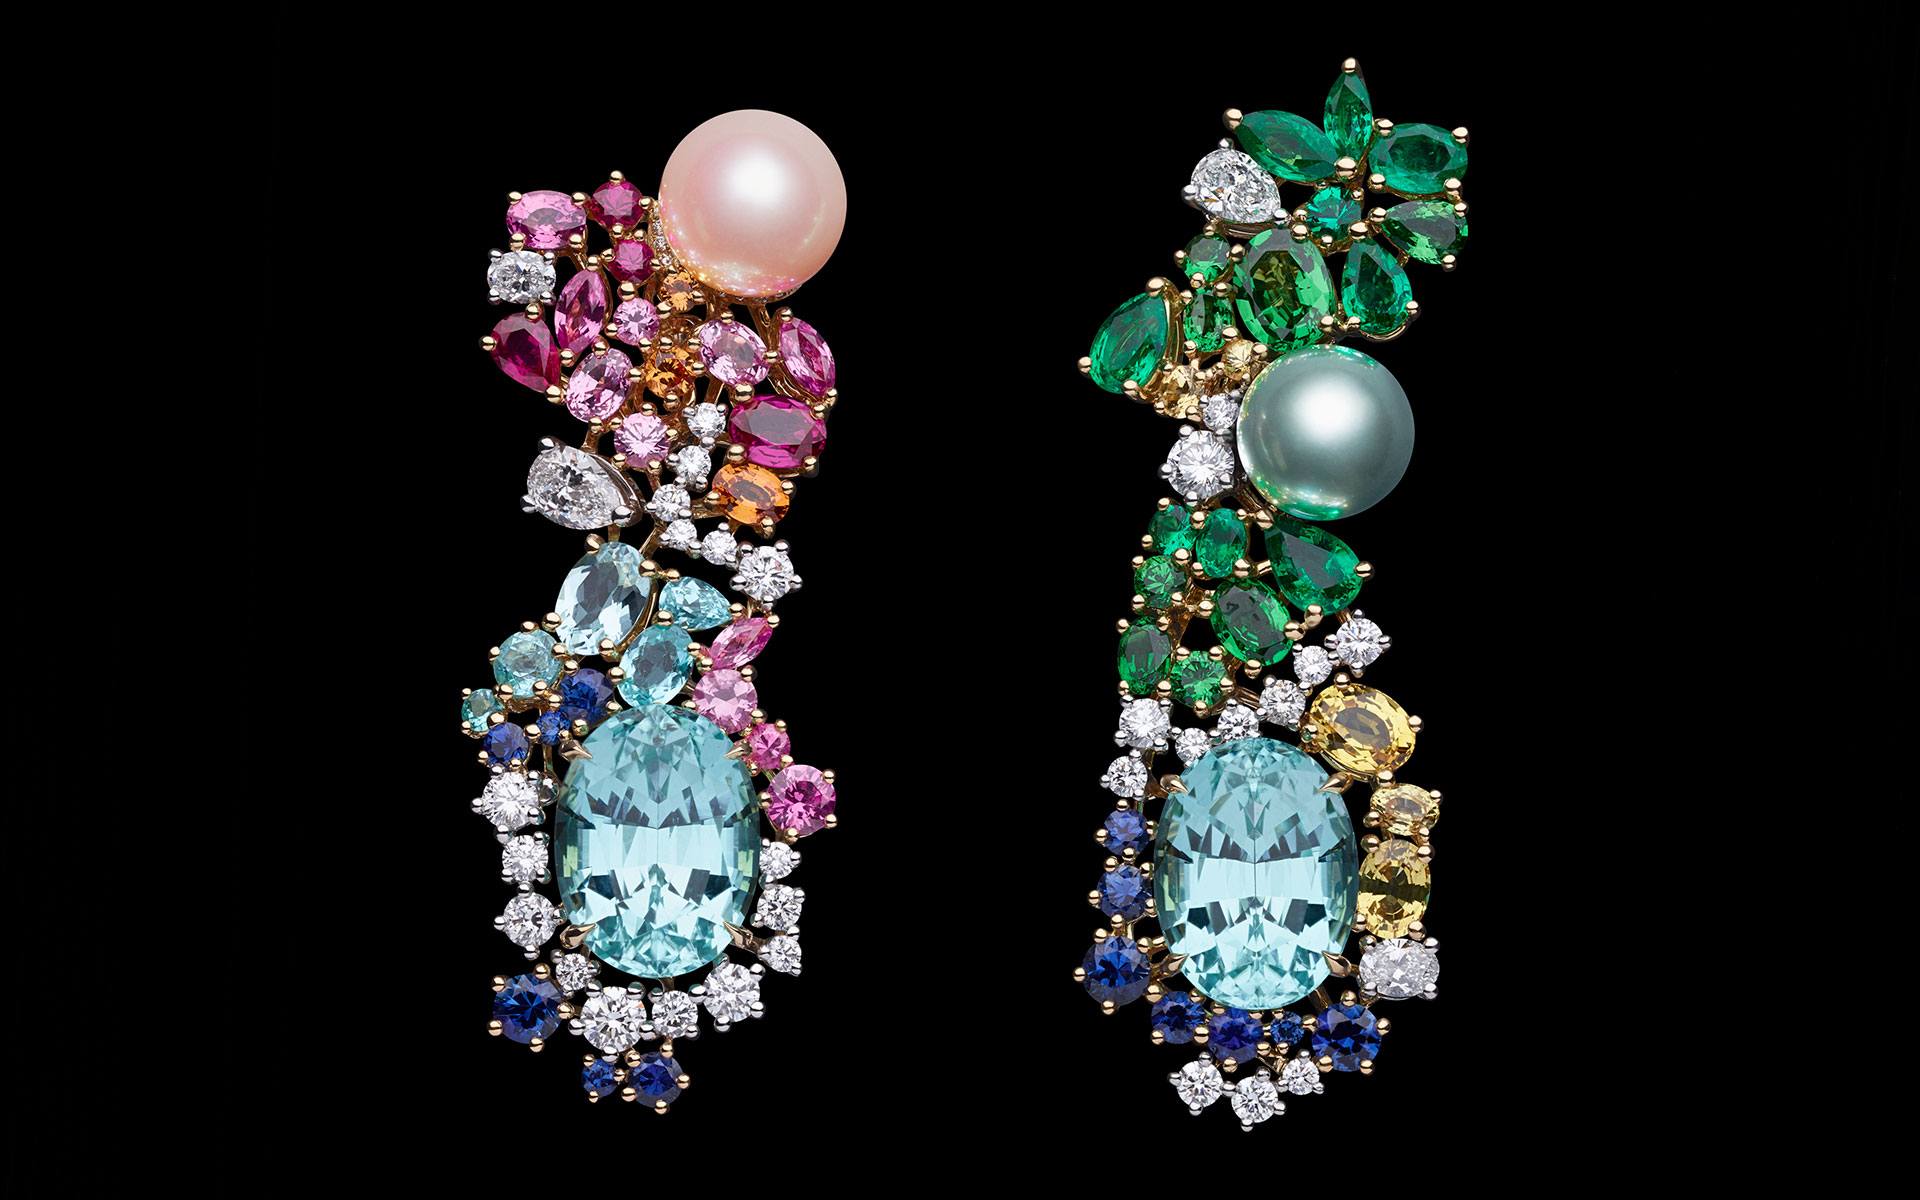 dior jewellery collection